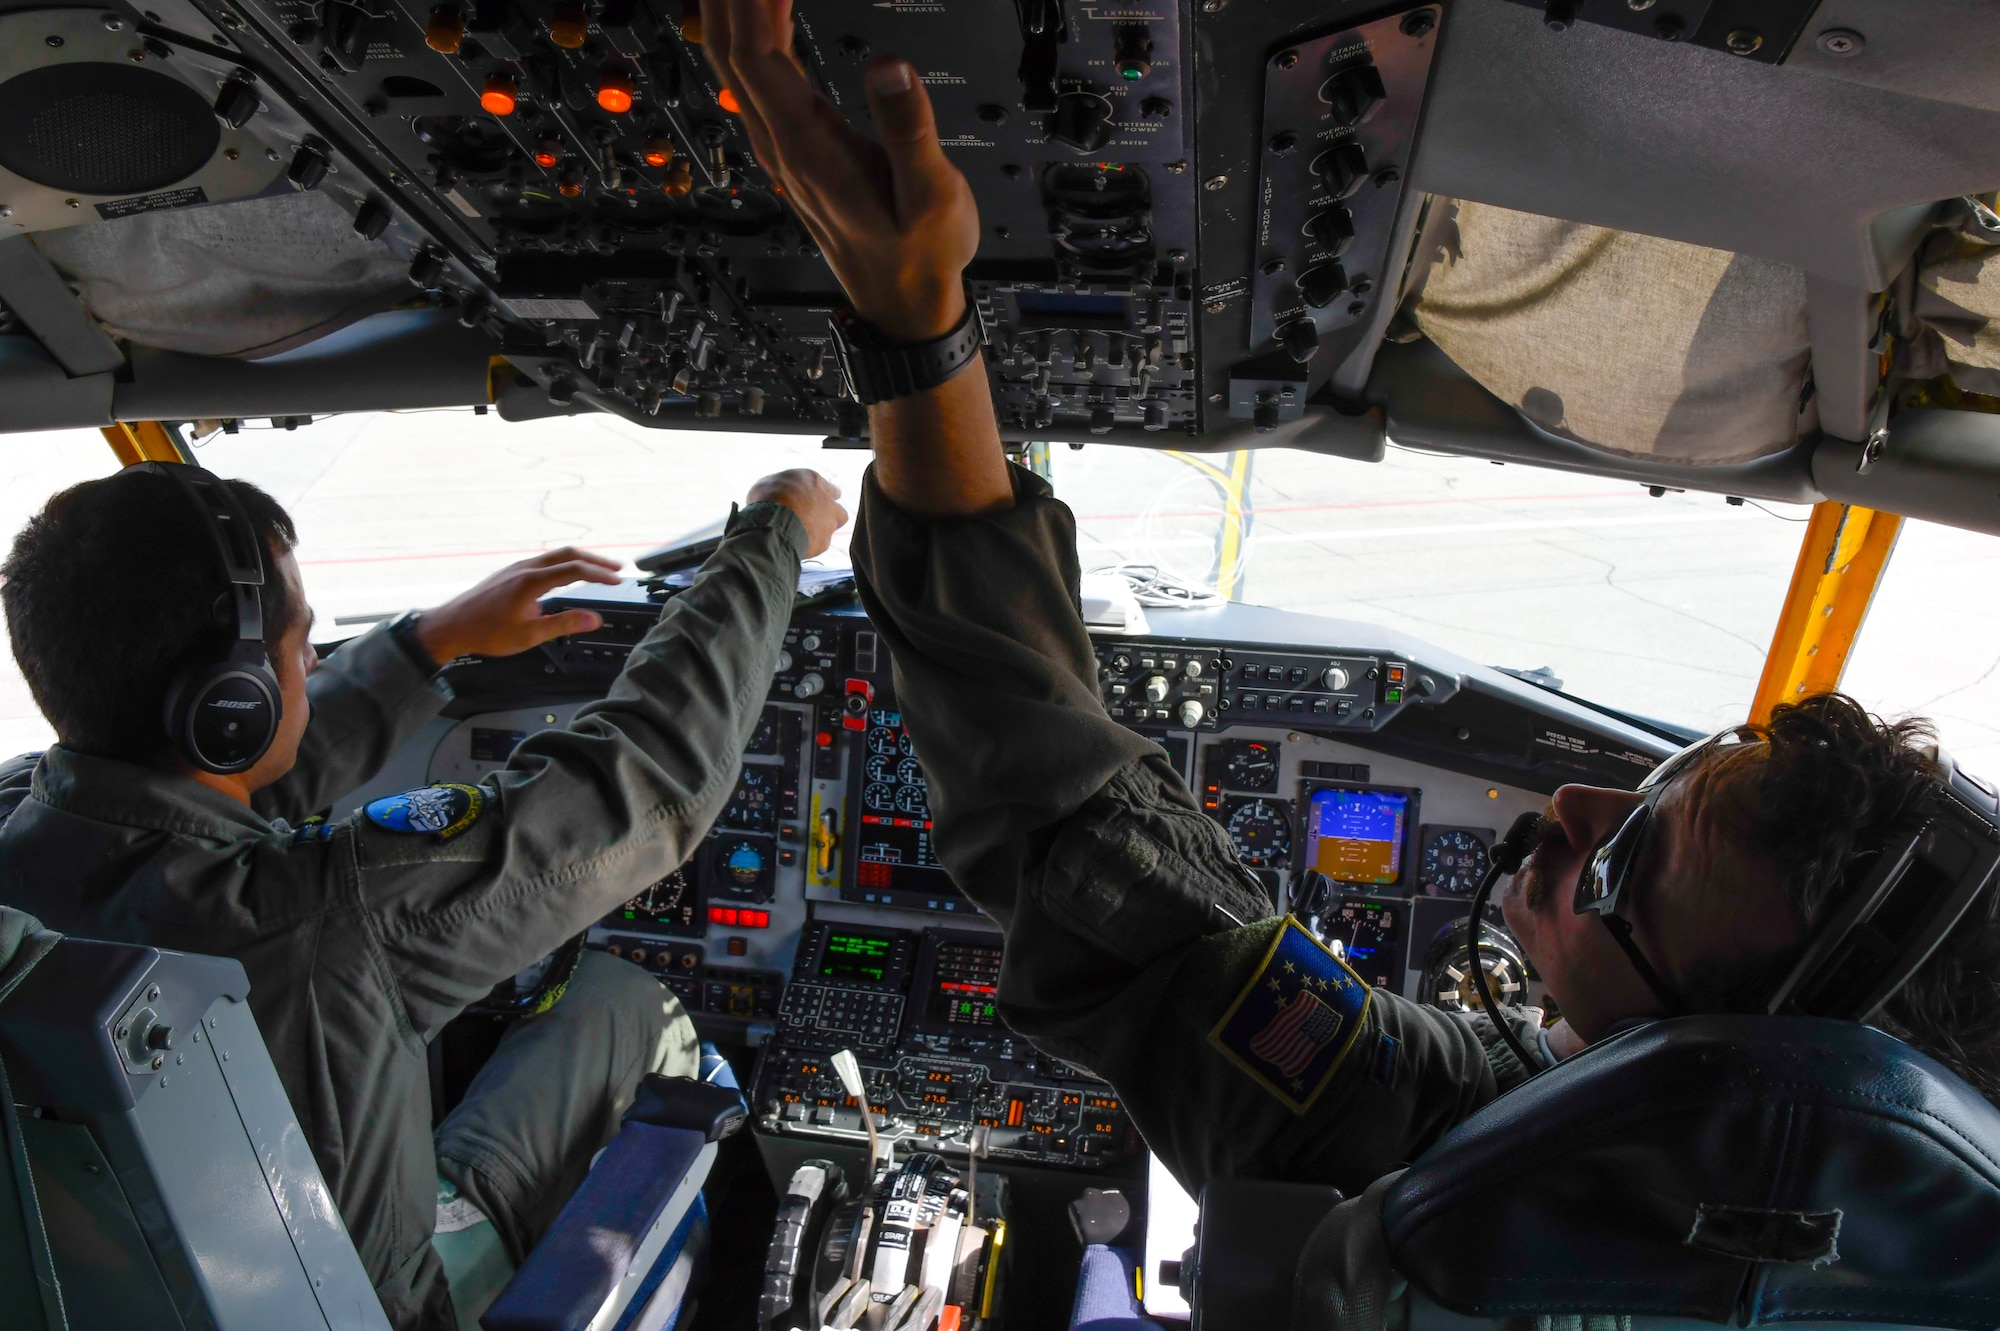 U.S. Air Force Capt. Steven Billa and 1st Lt. Sam Kendall, pilots assigned to the 168th Wing, Alaska Air National Guard, conduct pre-flight checks prior to an air refueling mission during the Red Flag-Alaska 23-3 exercise, August 15, 2023. Red Flag-Alaska provides realistic warfighting training scenarios and prepares Air Force, Joint, and Coalition aircrews to fight against peer-level adversaries in any combat environment. Global reach is an essential aspect of the U.S. military's warfighting ability, and aerial refueling helps to make global reach a reality. (U.S. Air National Guard photo by Senior Master Sgt. Julie Avey)